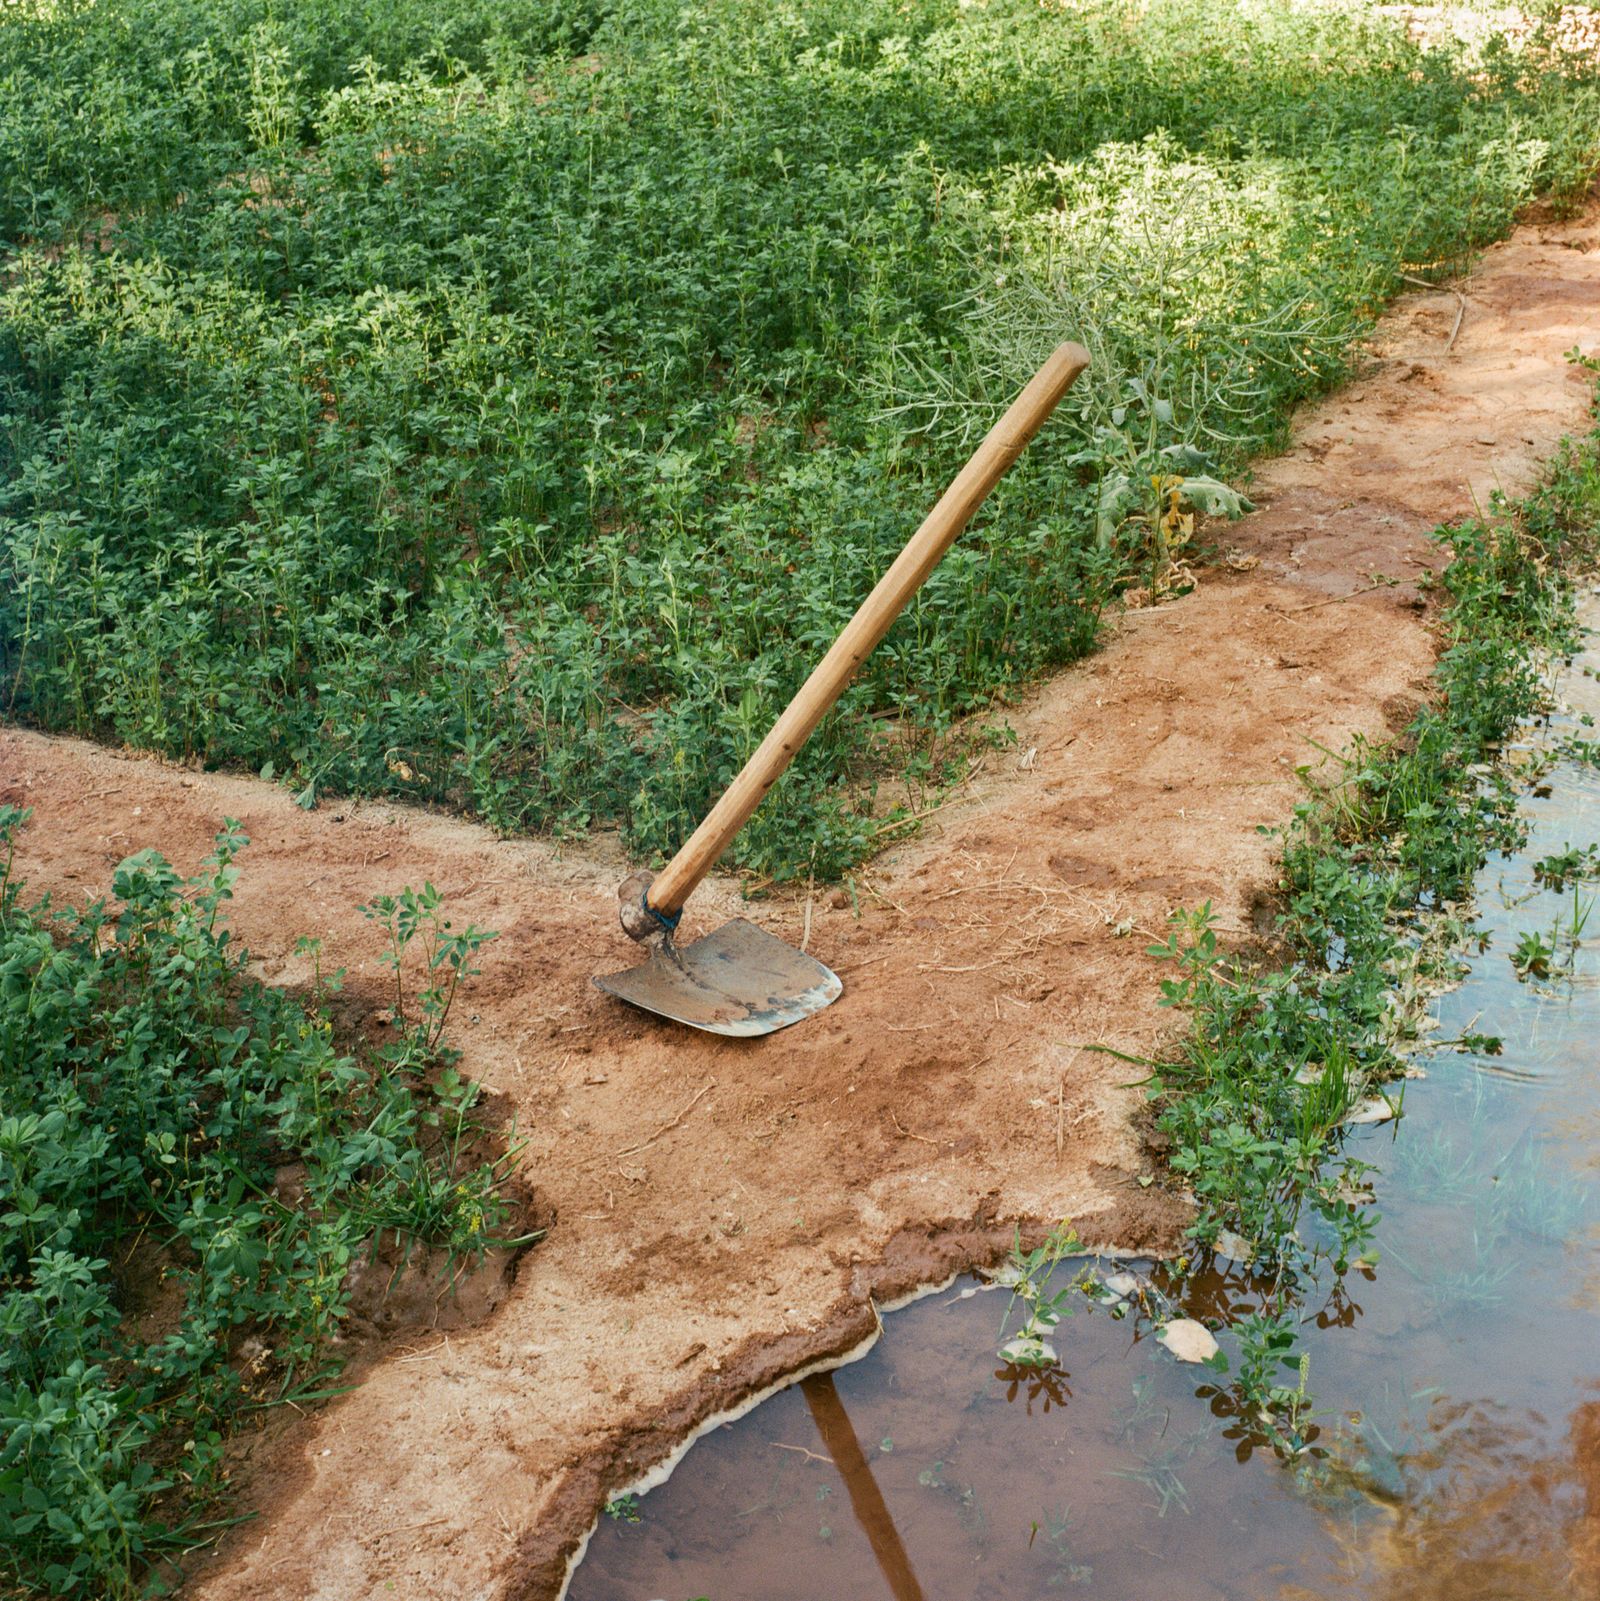 © M'hammed Kilito - A shovel in an agricultural field in Zagora oasis